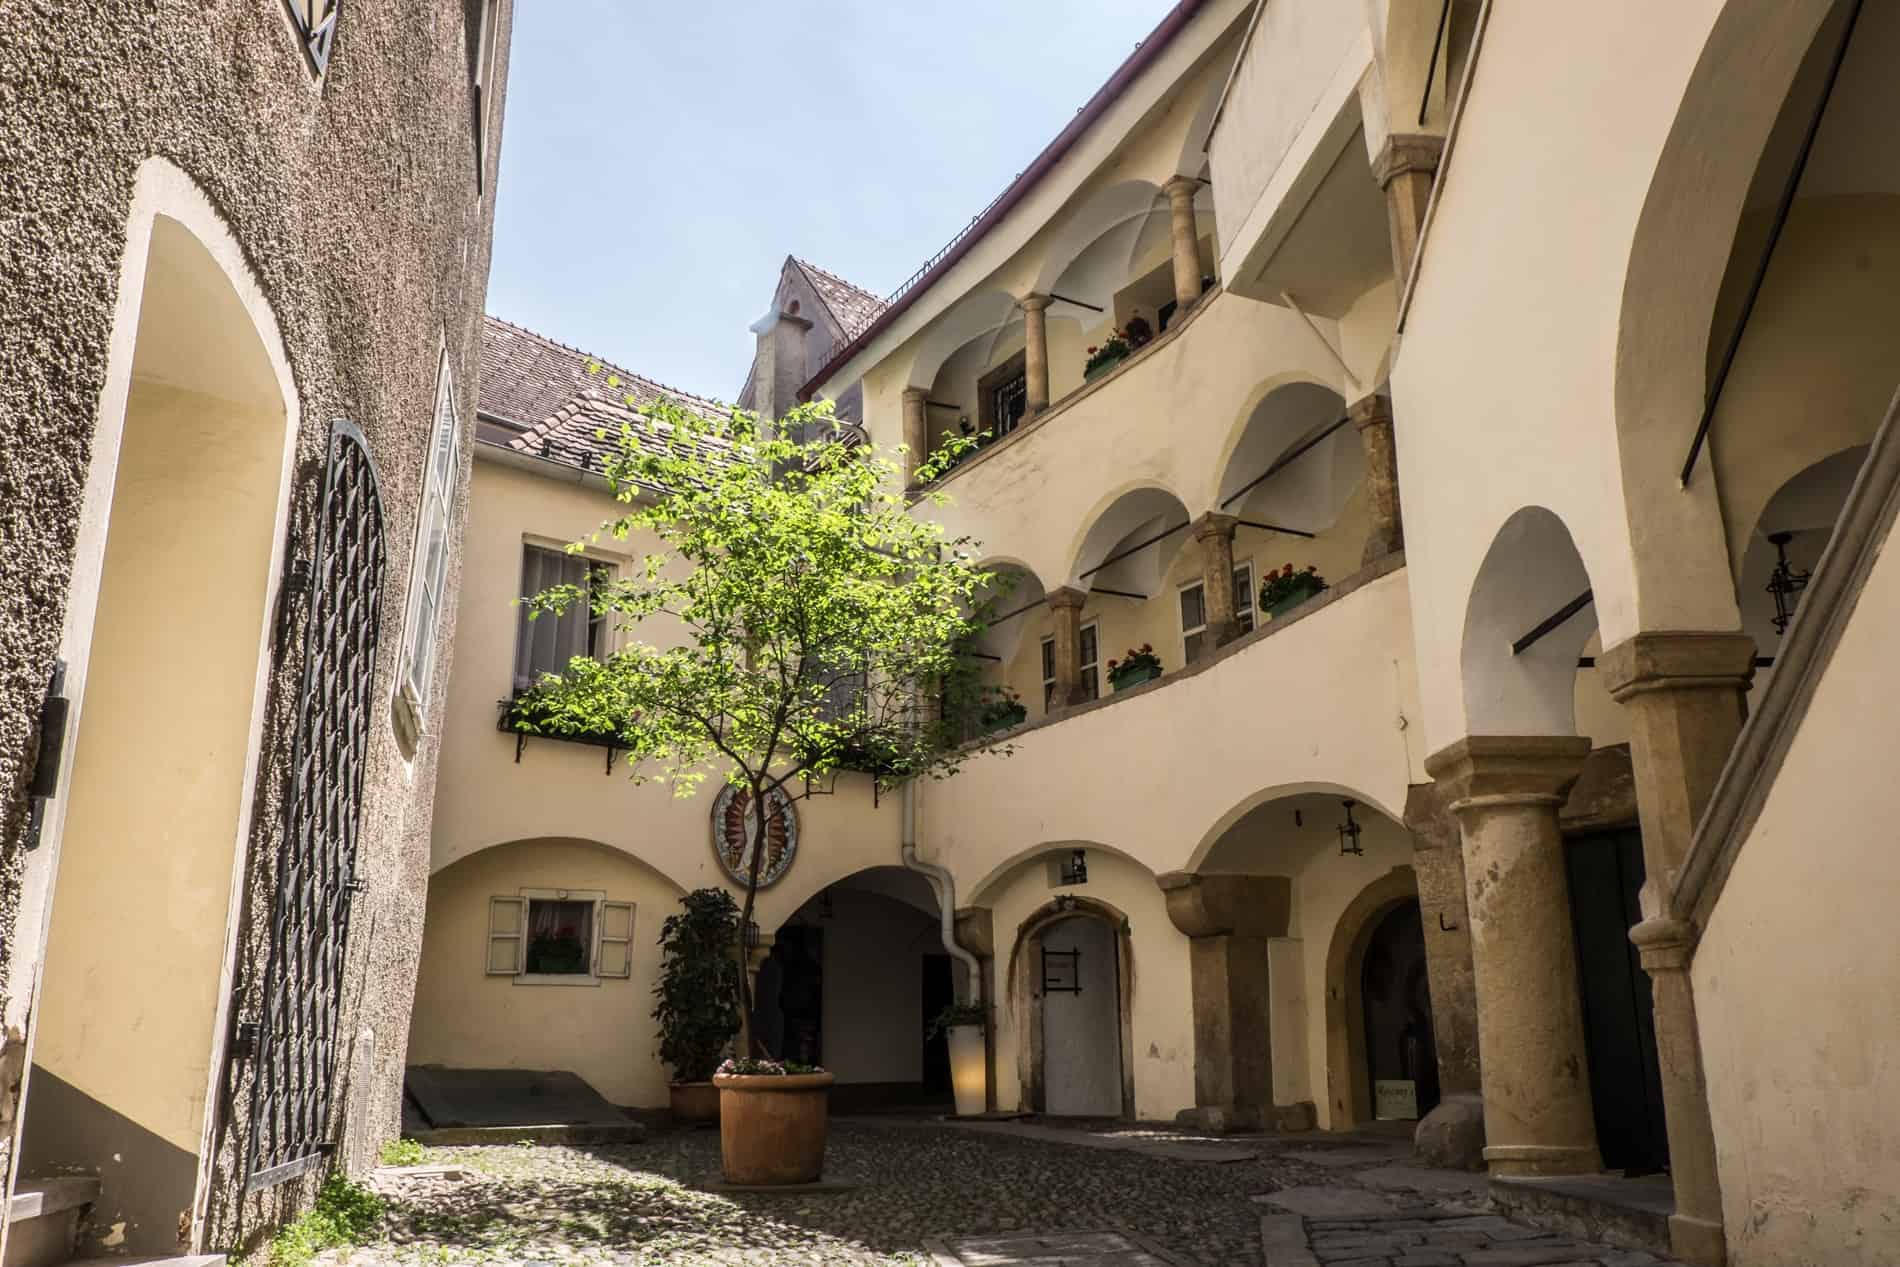 Inside the oldest courtyard in Graz city with arched windows and cobblestone pathways.